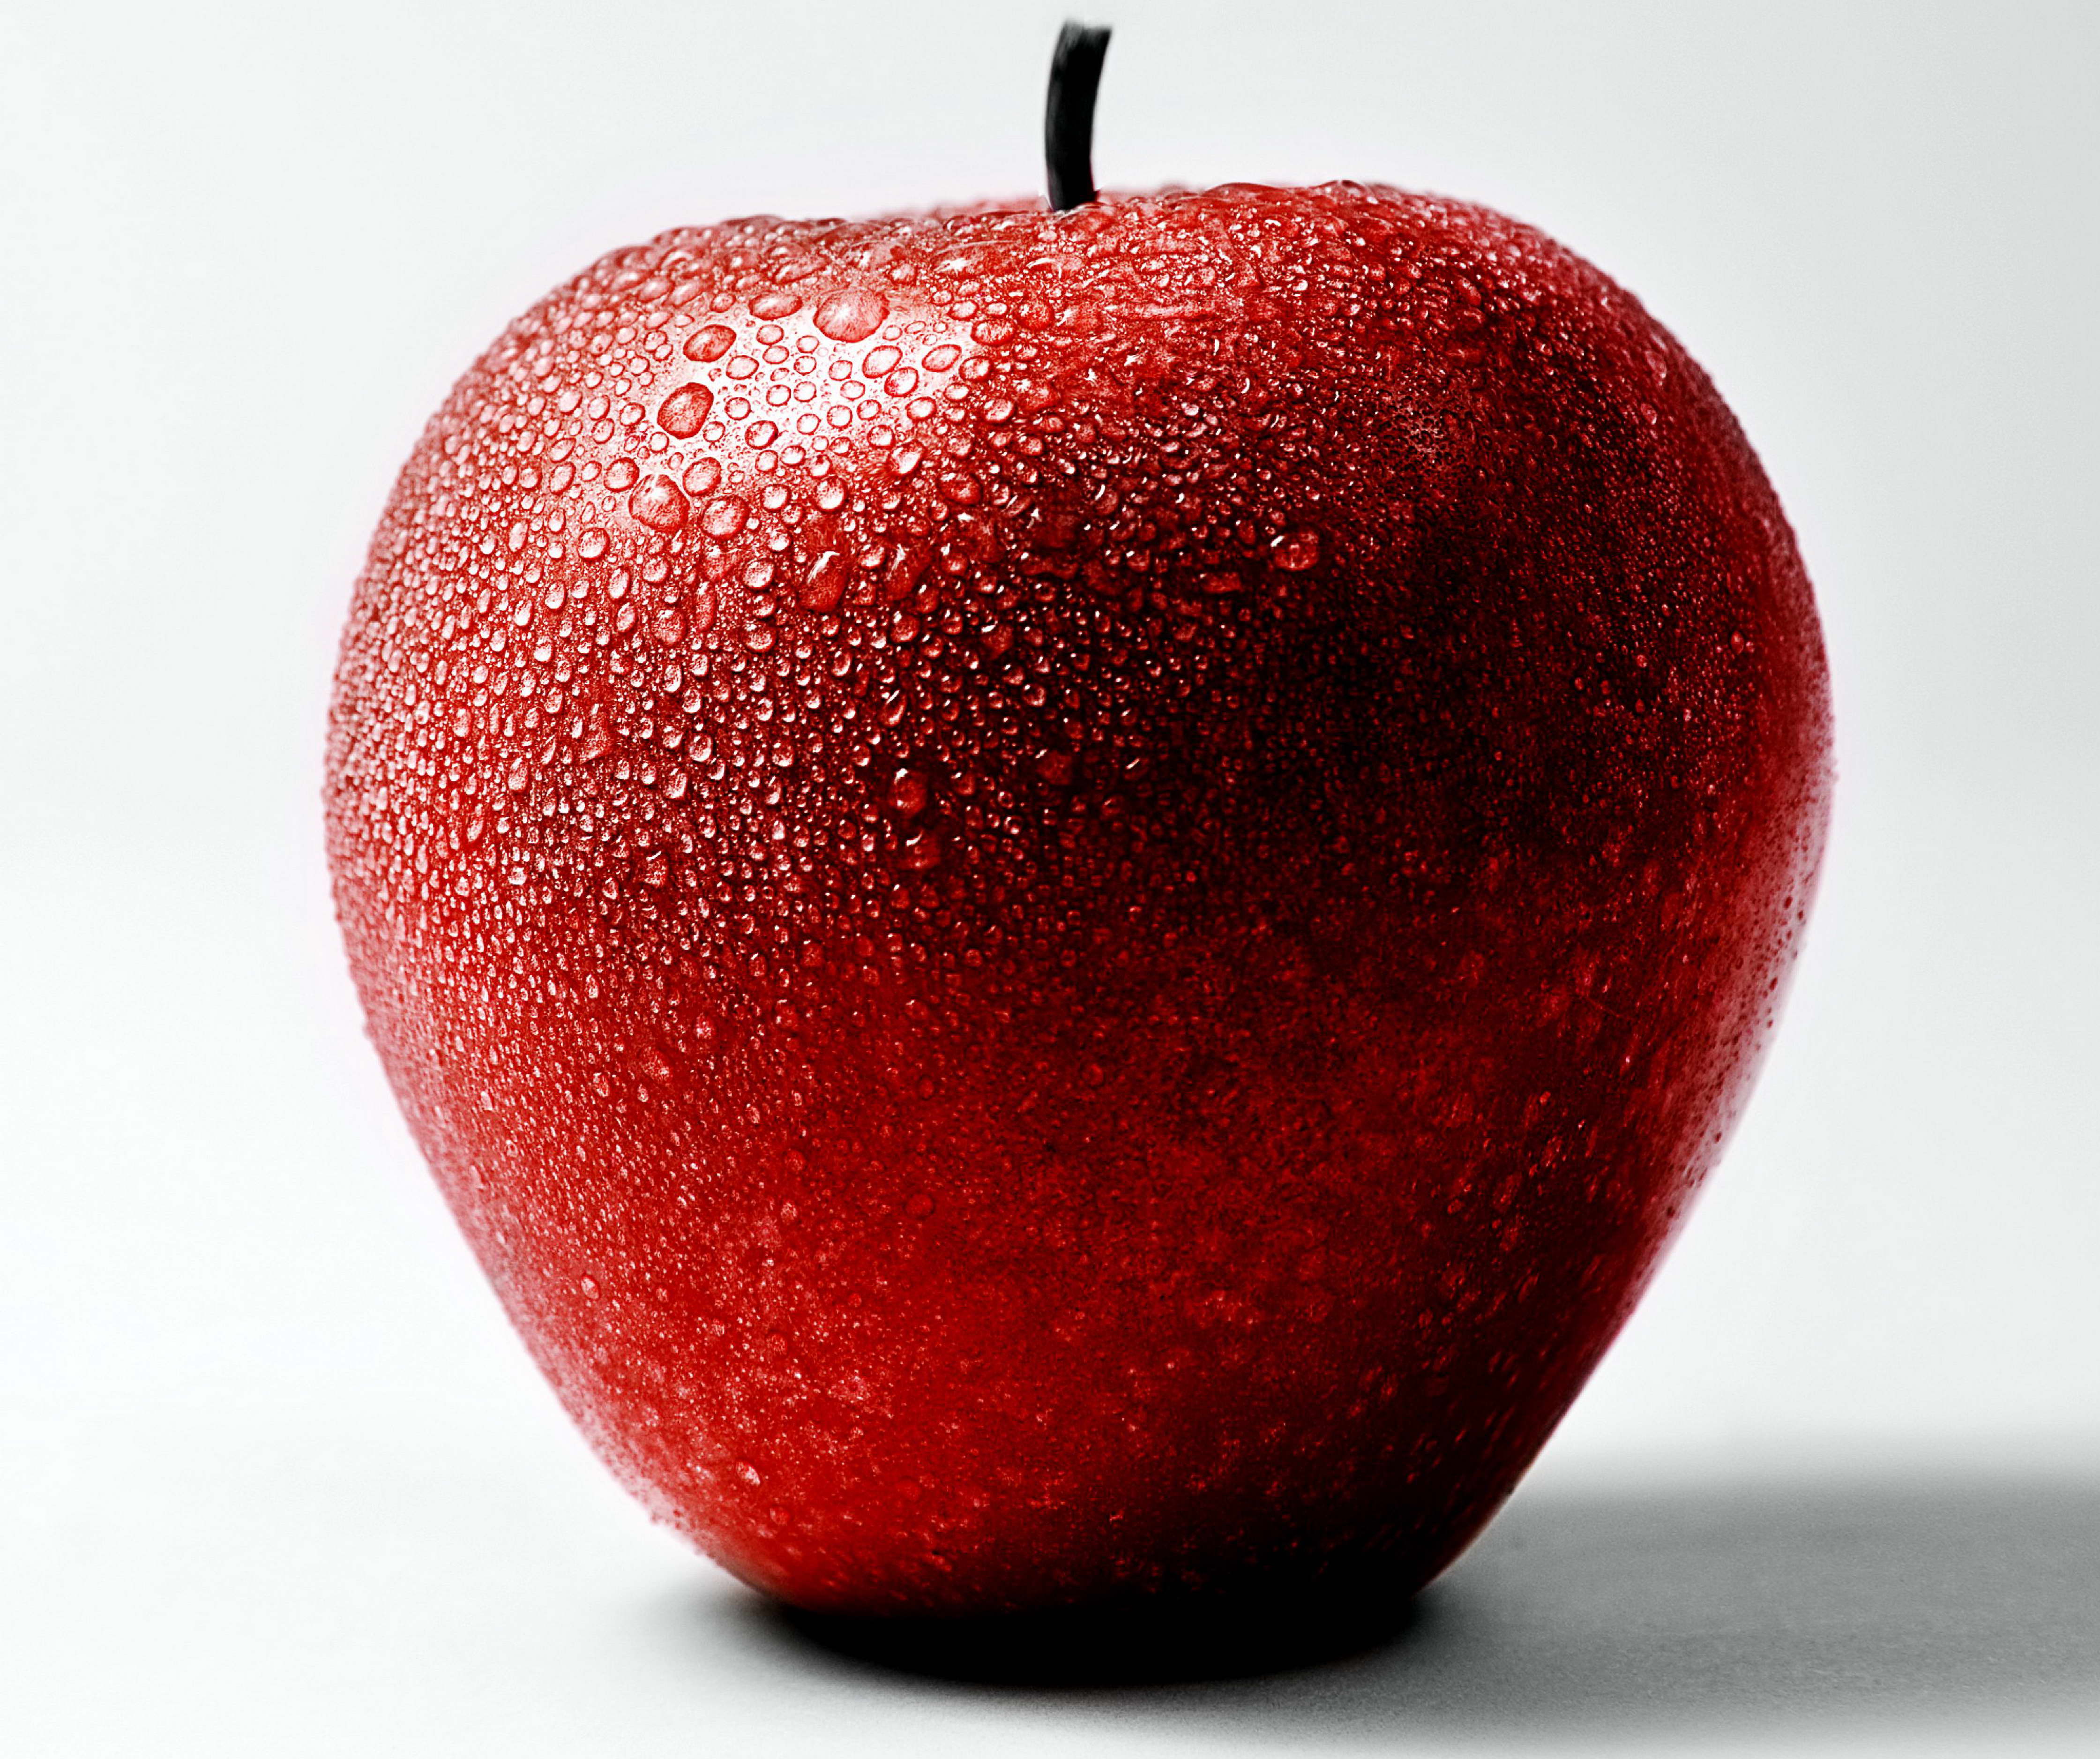 Free picture: red apple, water, droplets